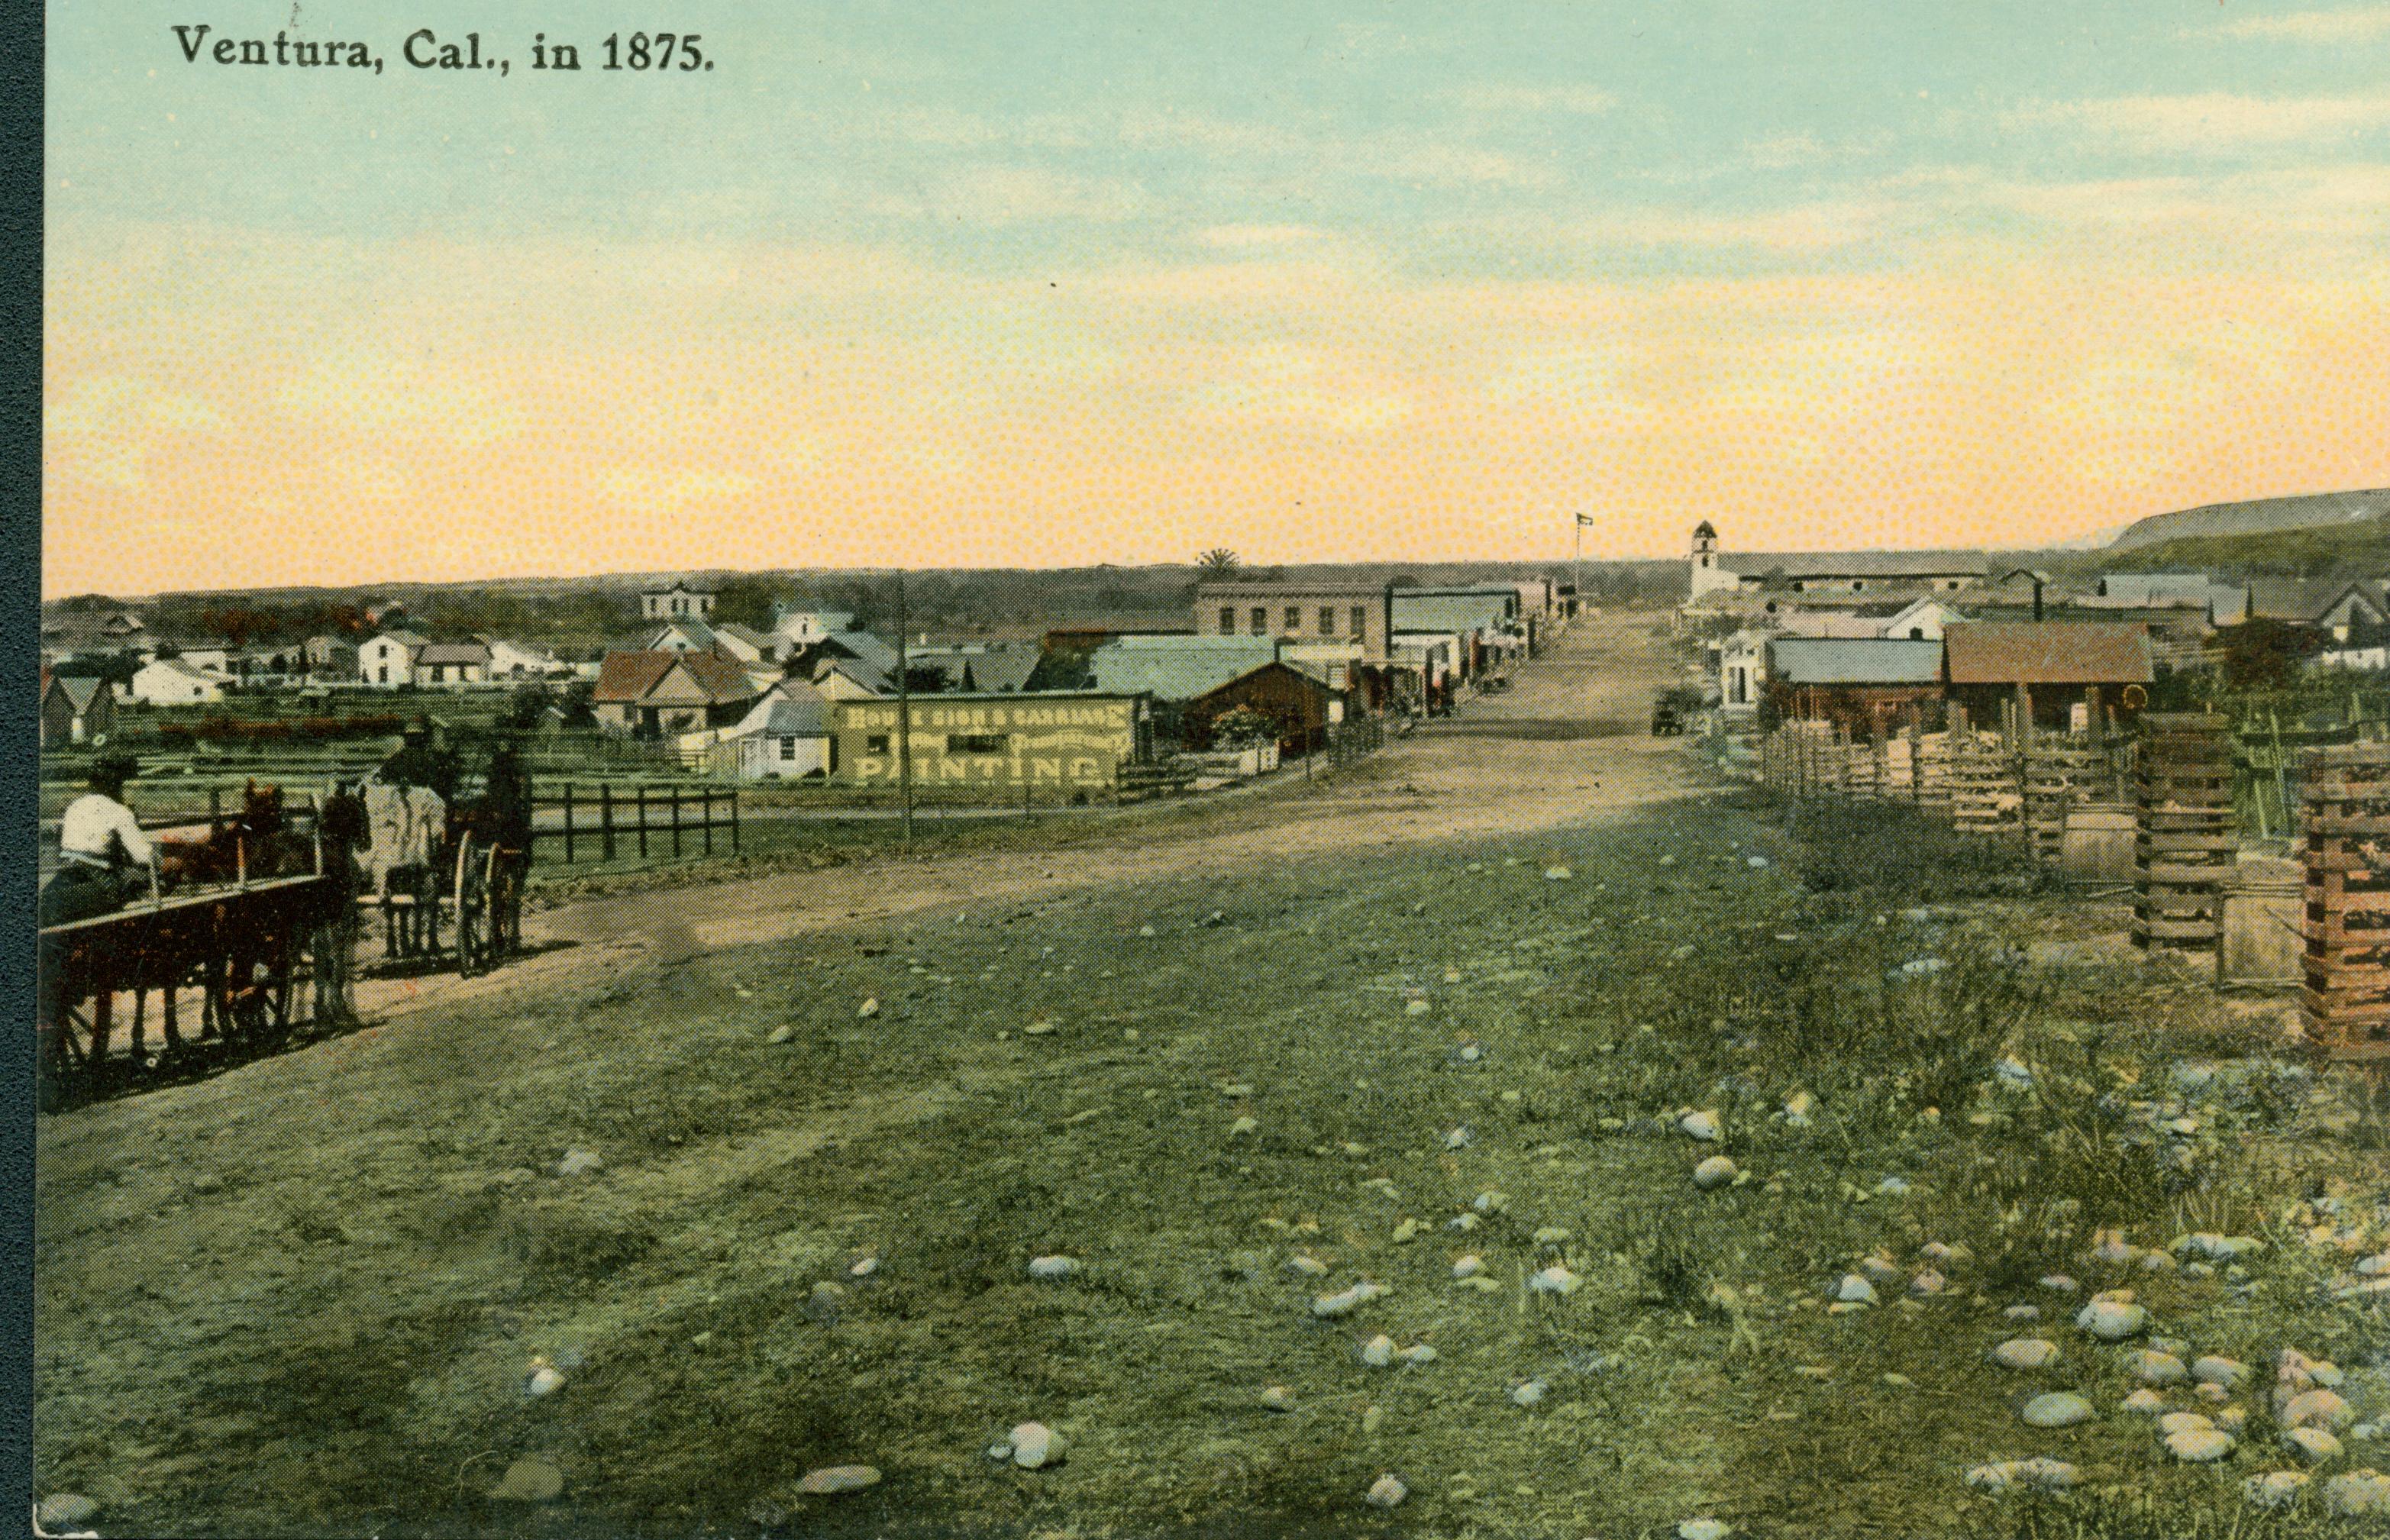 Shows a dirt road lined with buildings